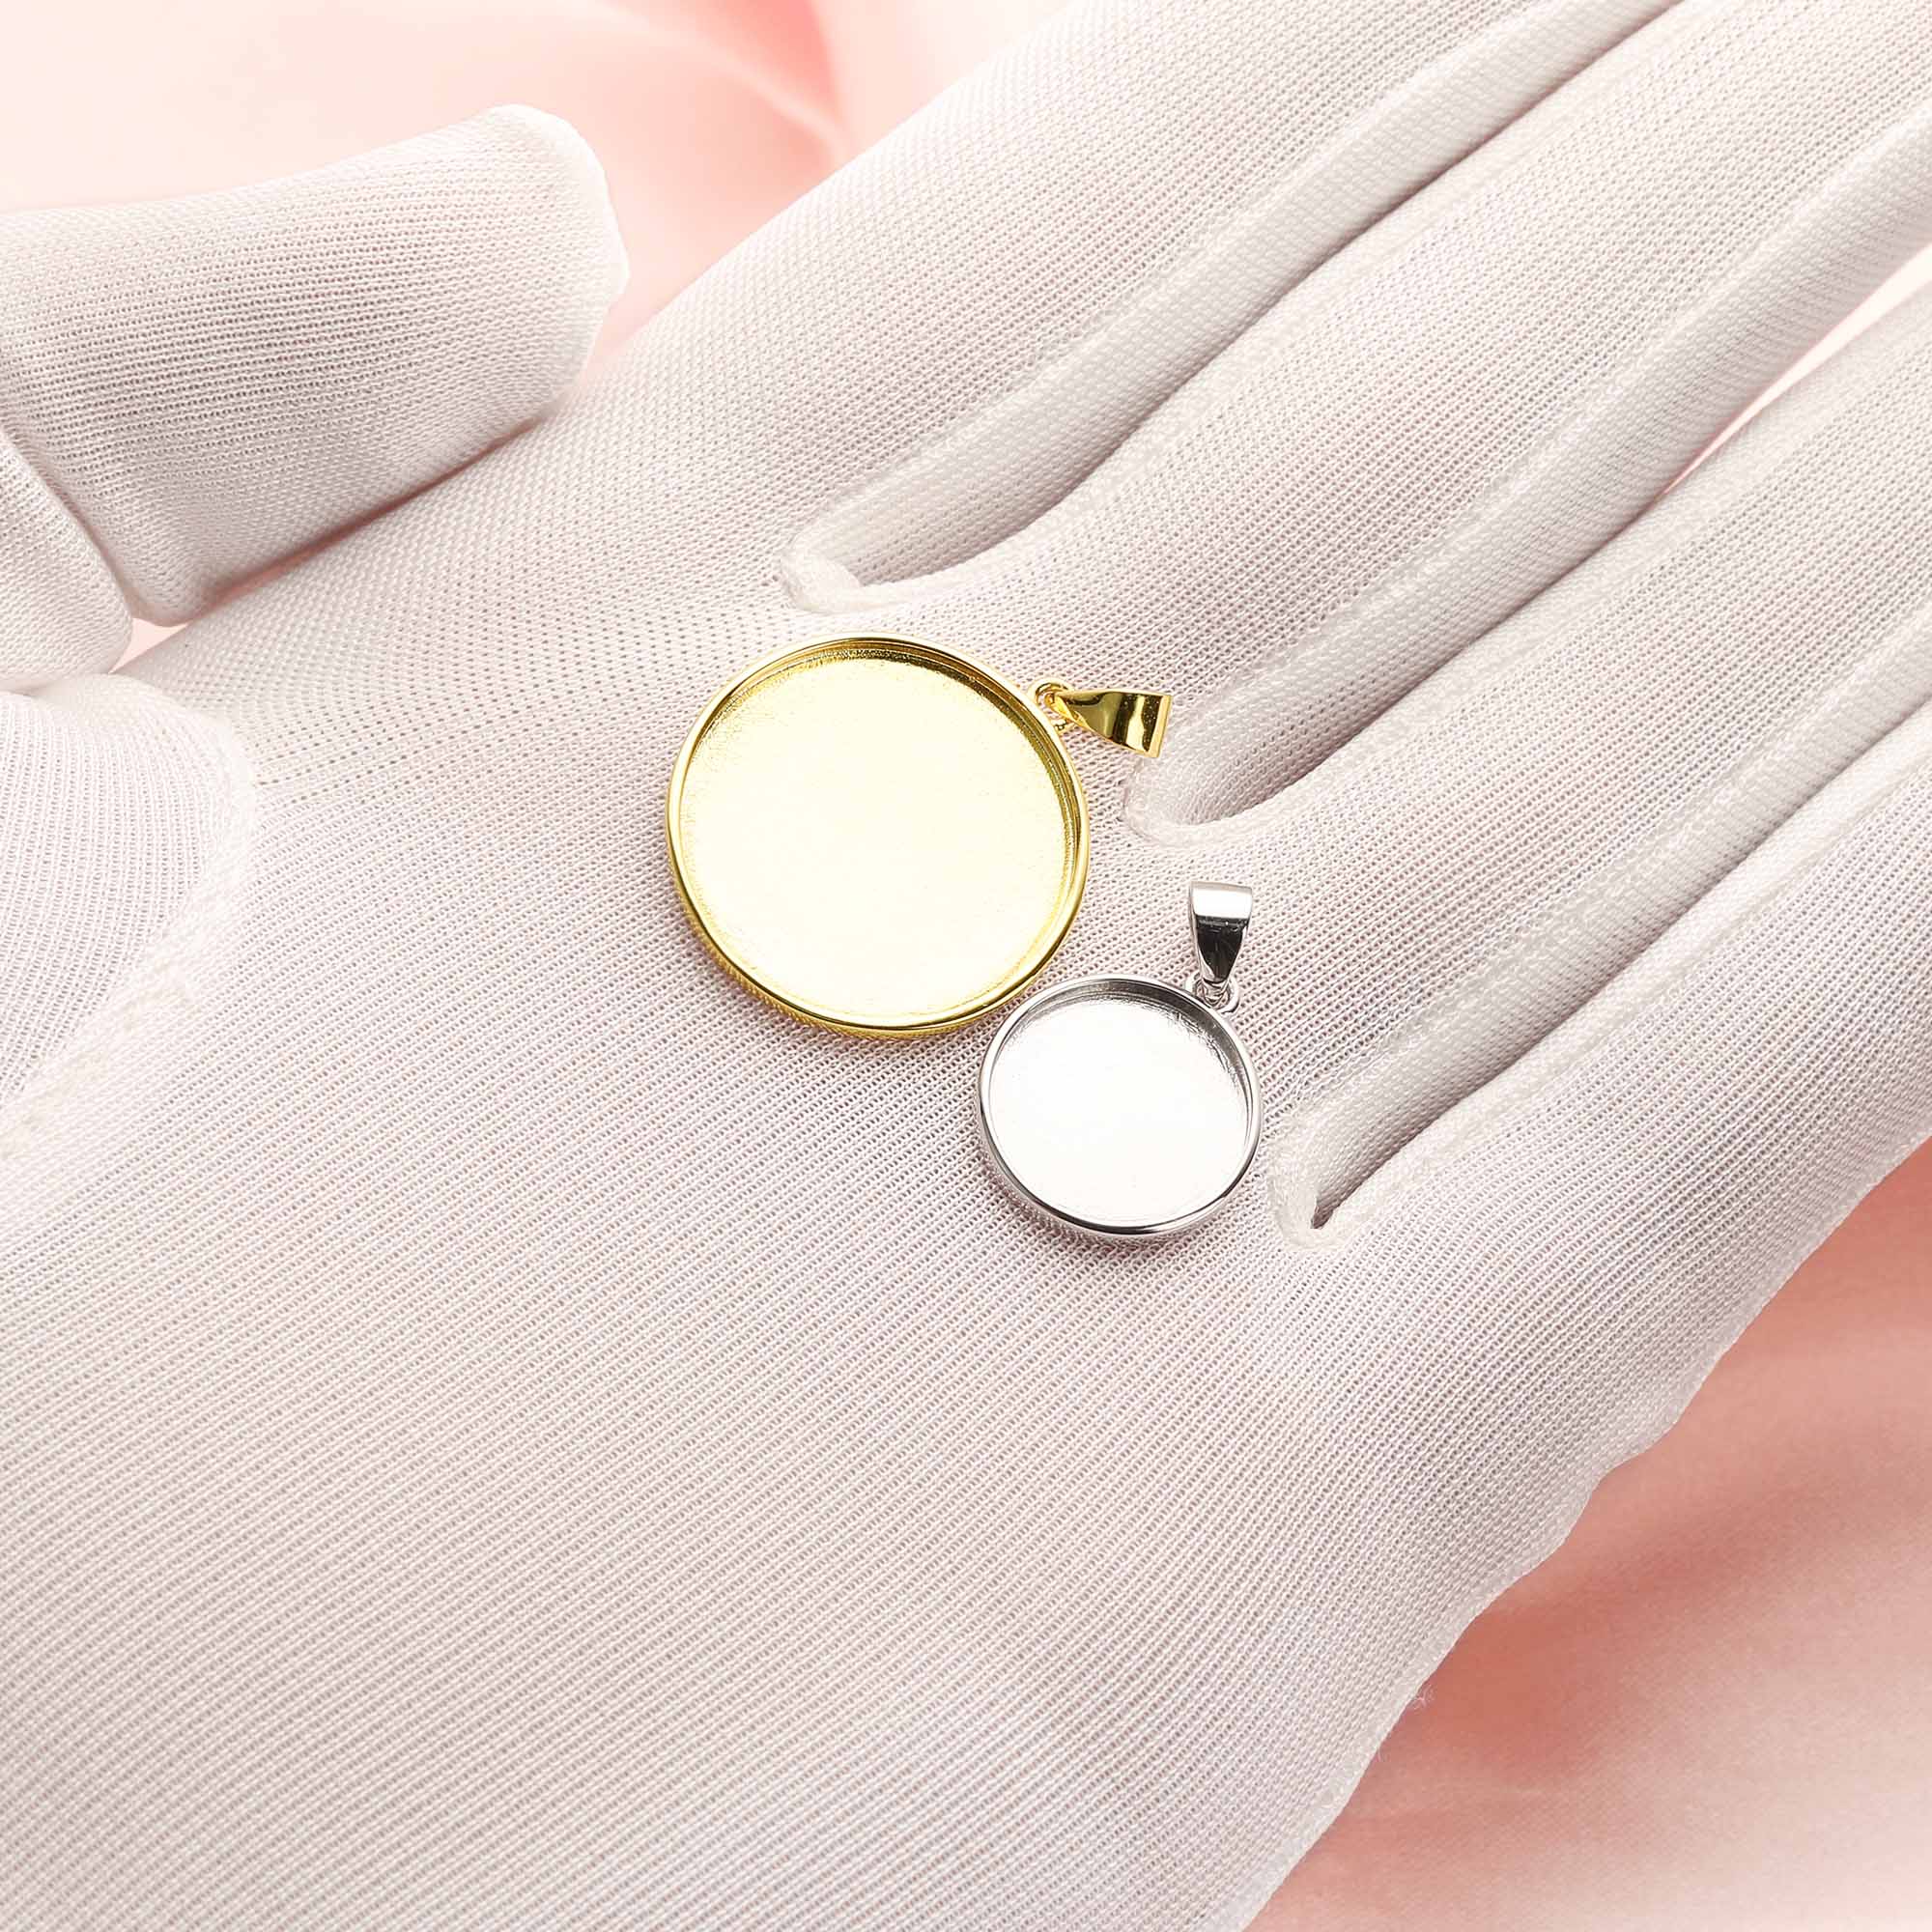 Keepsake Breast Milk Round Solid Back Pendant Bezel Settings,Solid 14K 18K Gold Charm,DIY Memory Jewelry Supplies 1411330 - Click Image to Close